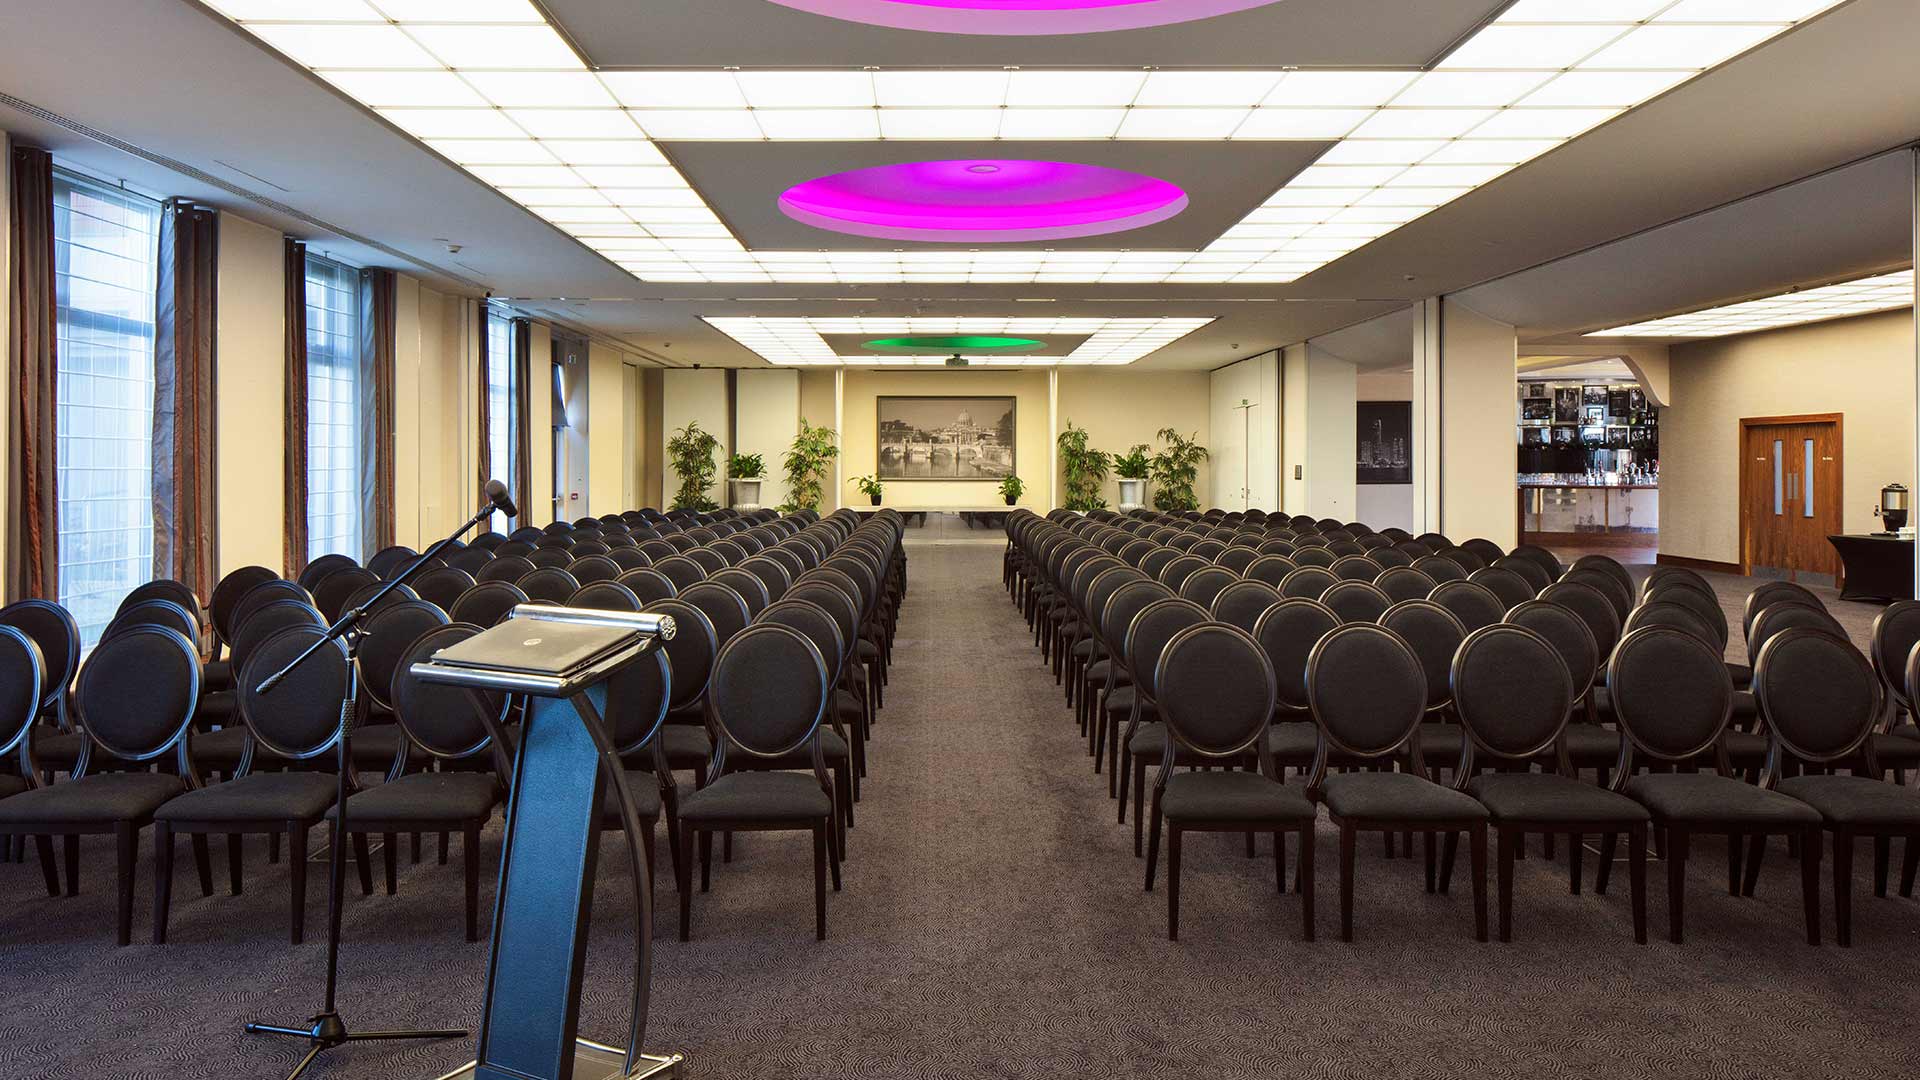 Large meeting & conference room in Cork with rows of seats